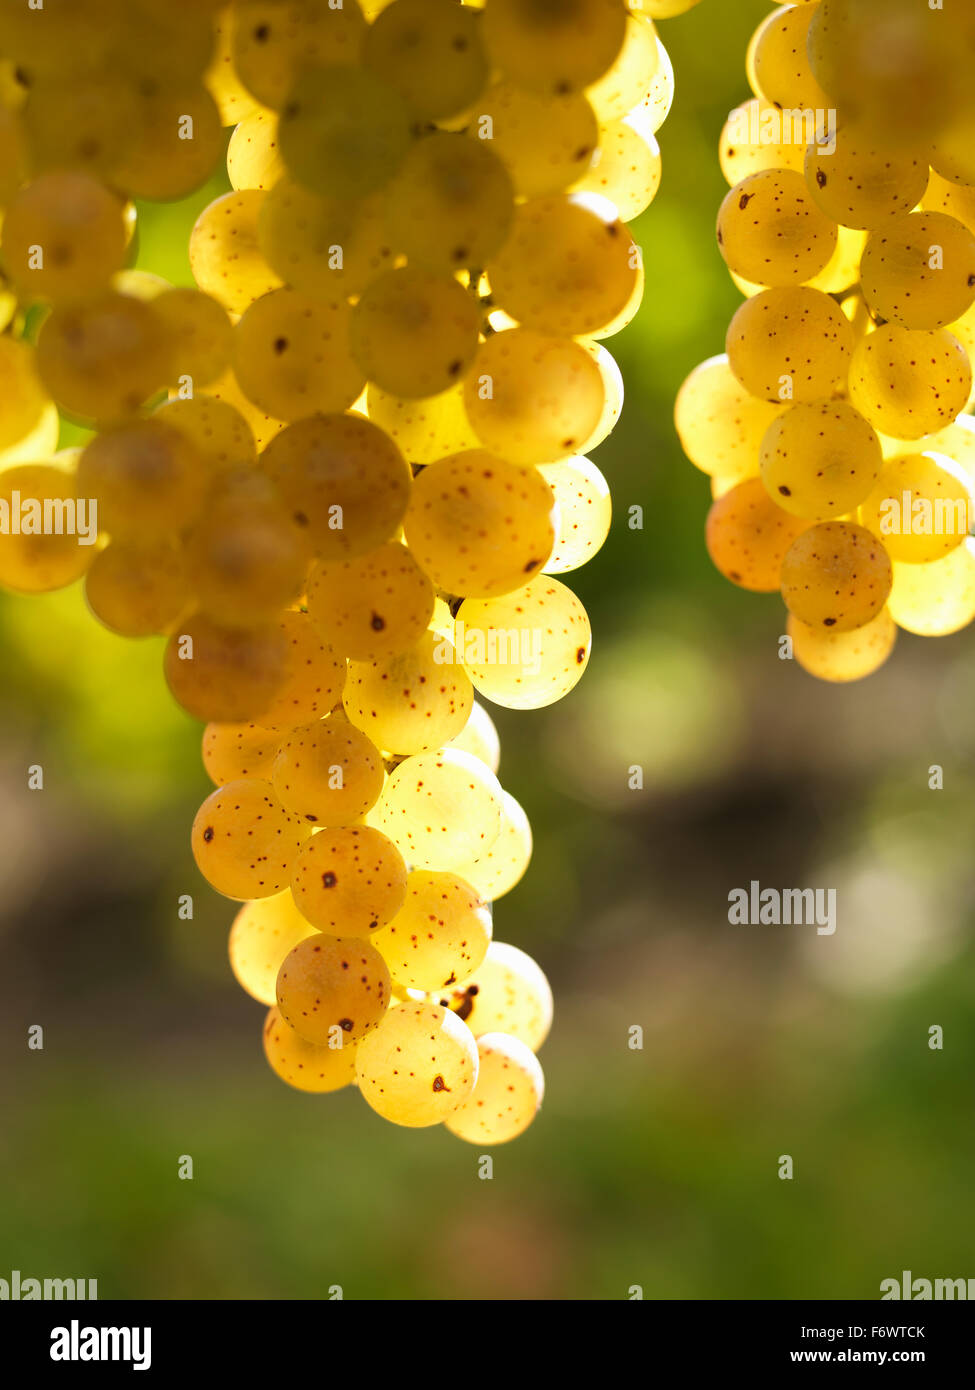 Canada,Ontario,Niagara-on-the-Lake, ripe white grapes on the vine light by sunlight. Vineyard grapes for white wine production. Stock Photo